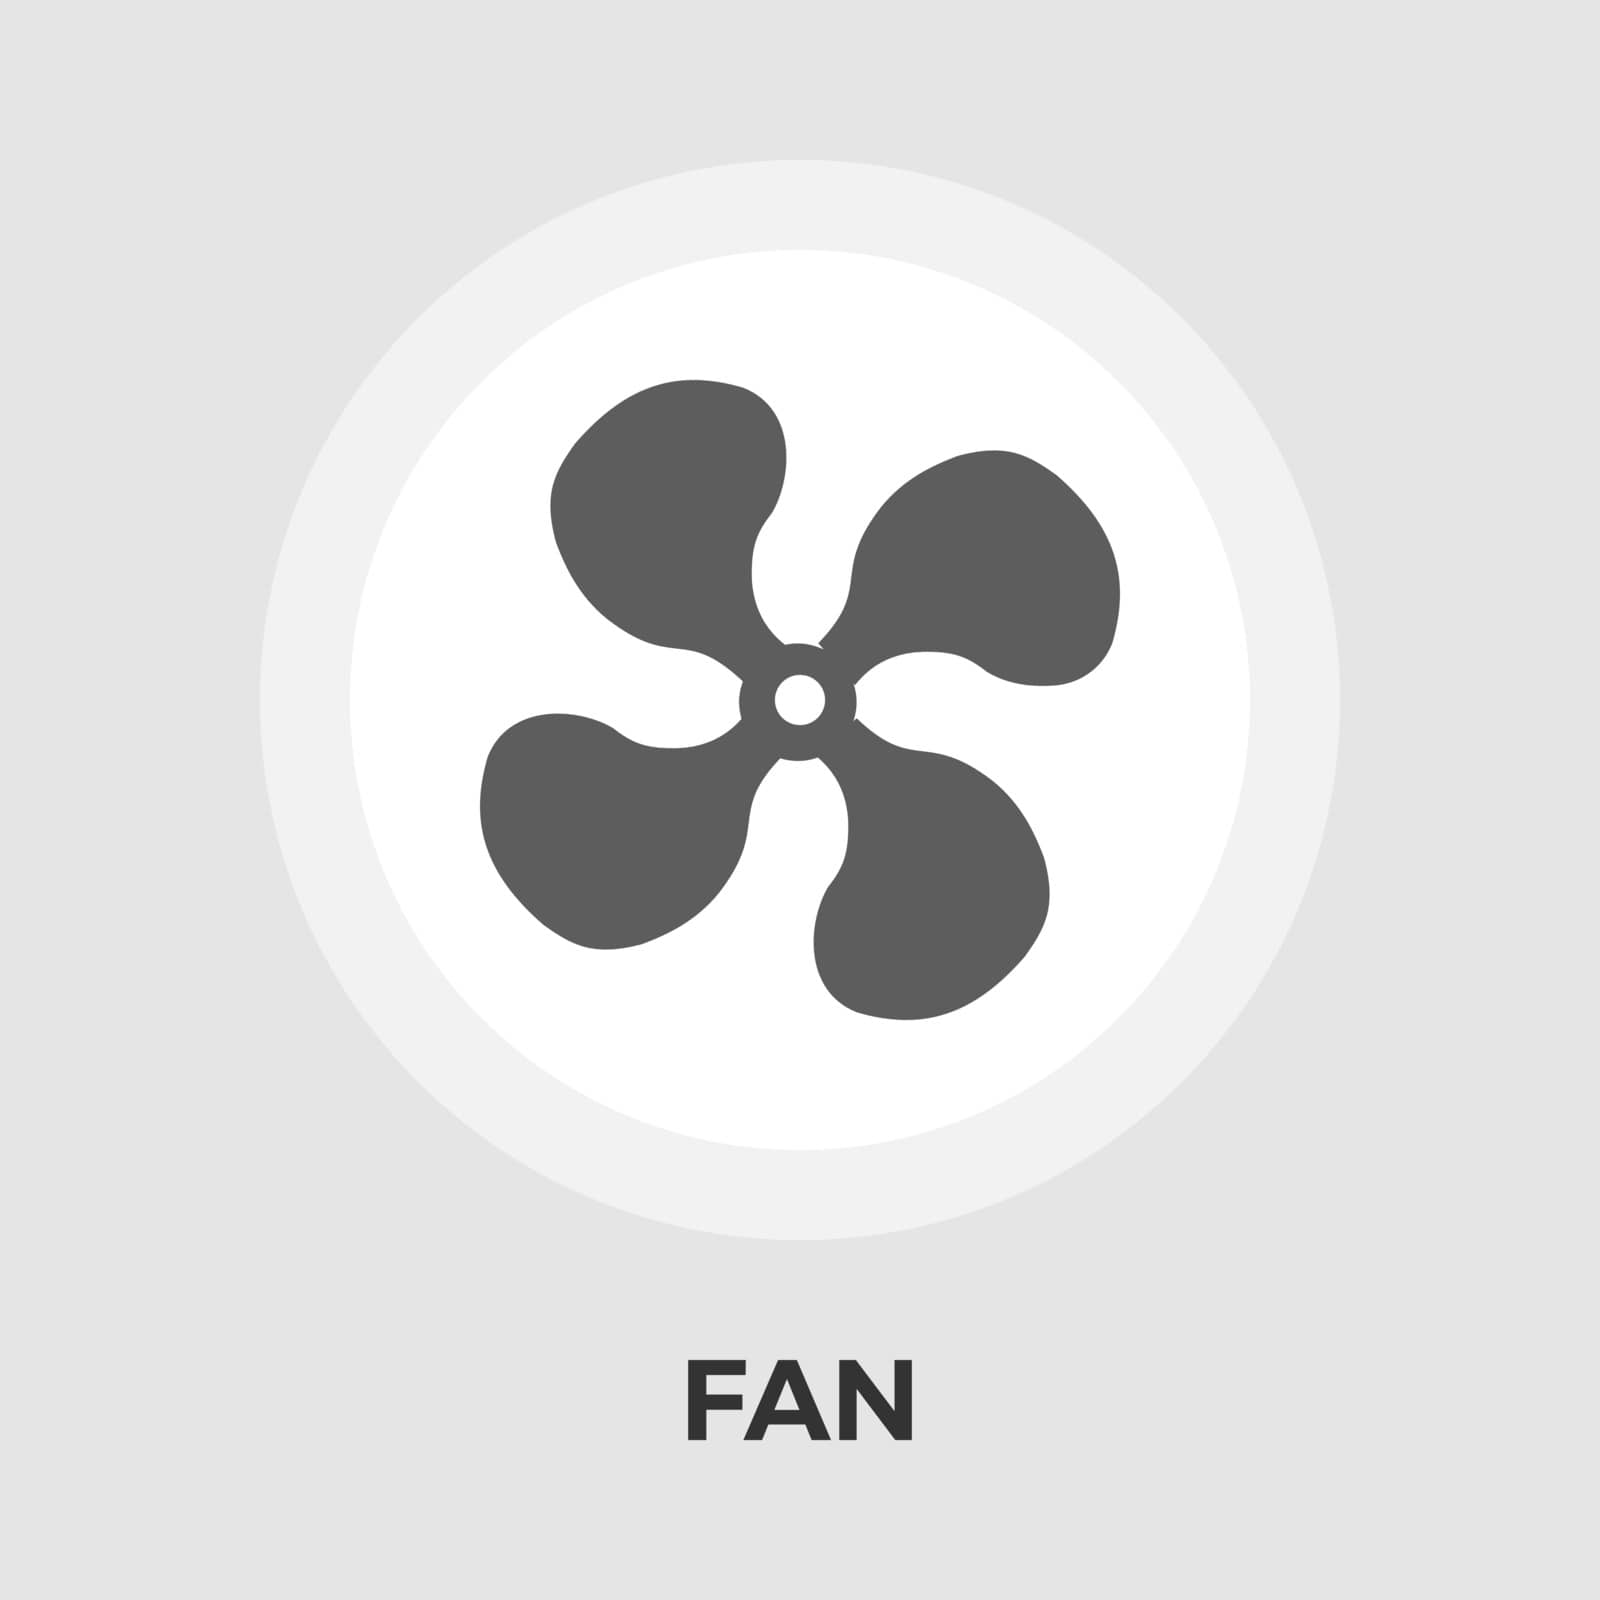 Fan icon vector. Flat icon isolated on the white background. Editable EPS file. Vector illustration.